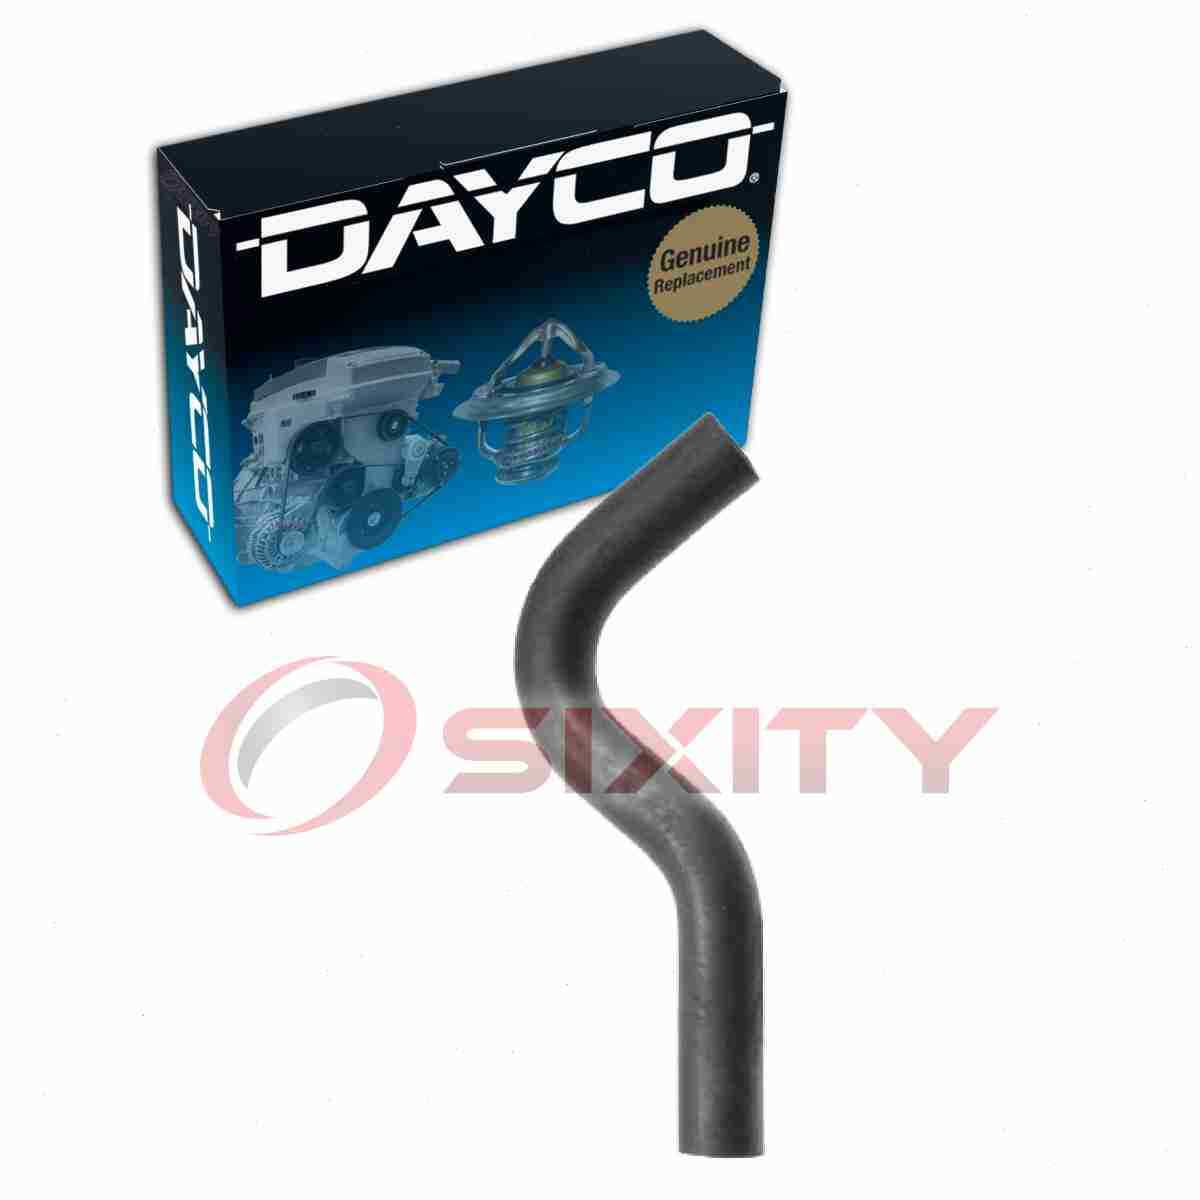 Dayco Upper Radiator Coolant Hose for 1984-1986 Dodge Conquest Belts Cooling kq